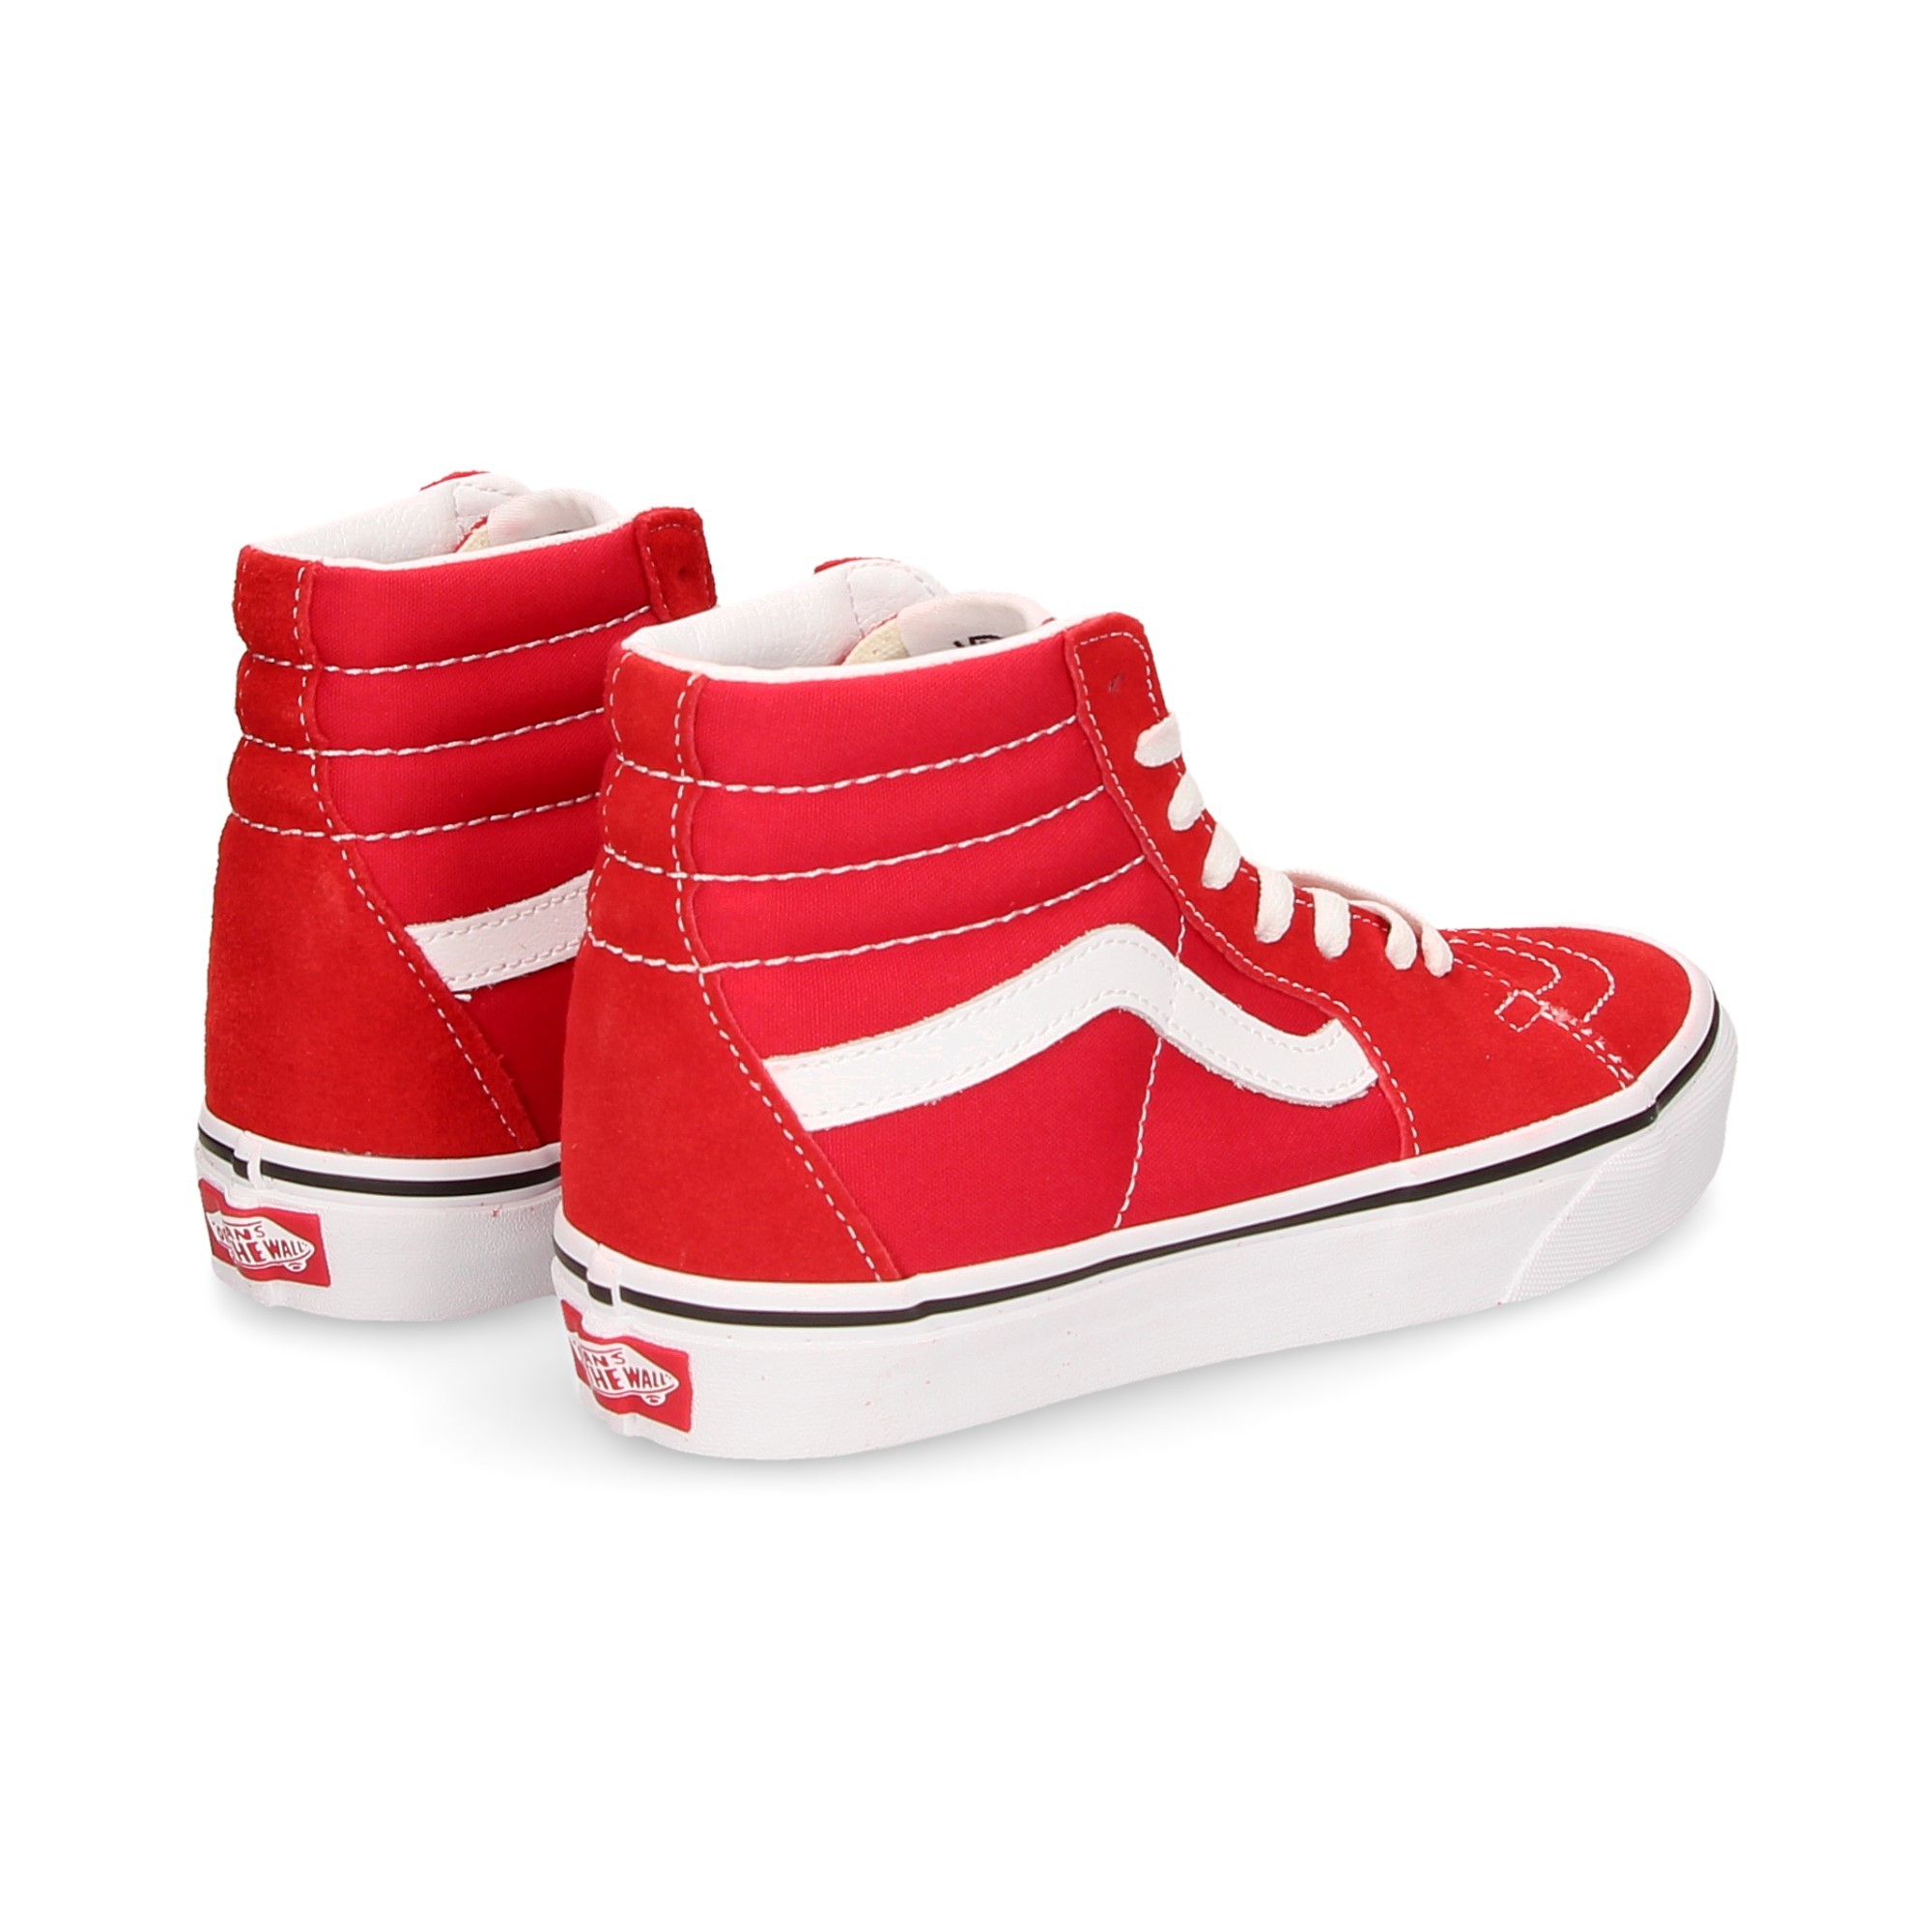 white-red-boot-band